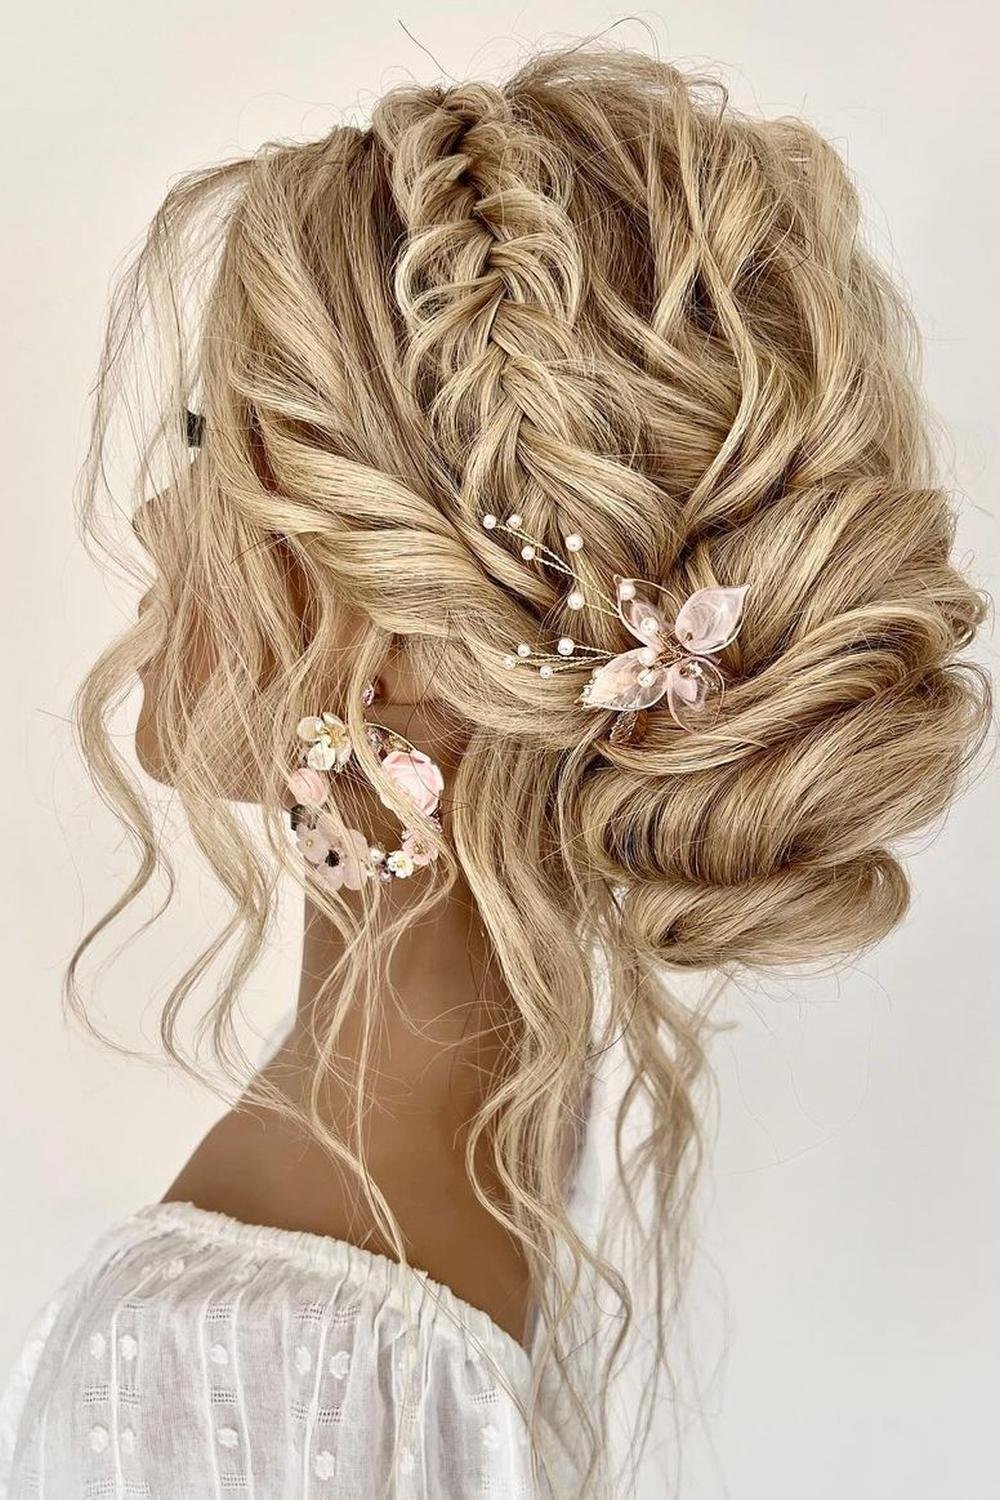 28 - Picture of Braided Hairstyles